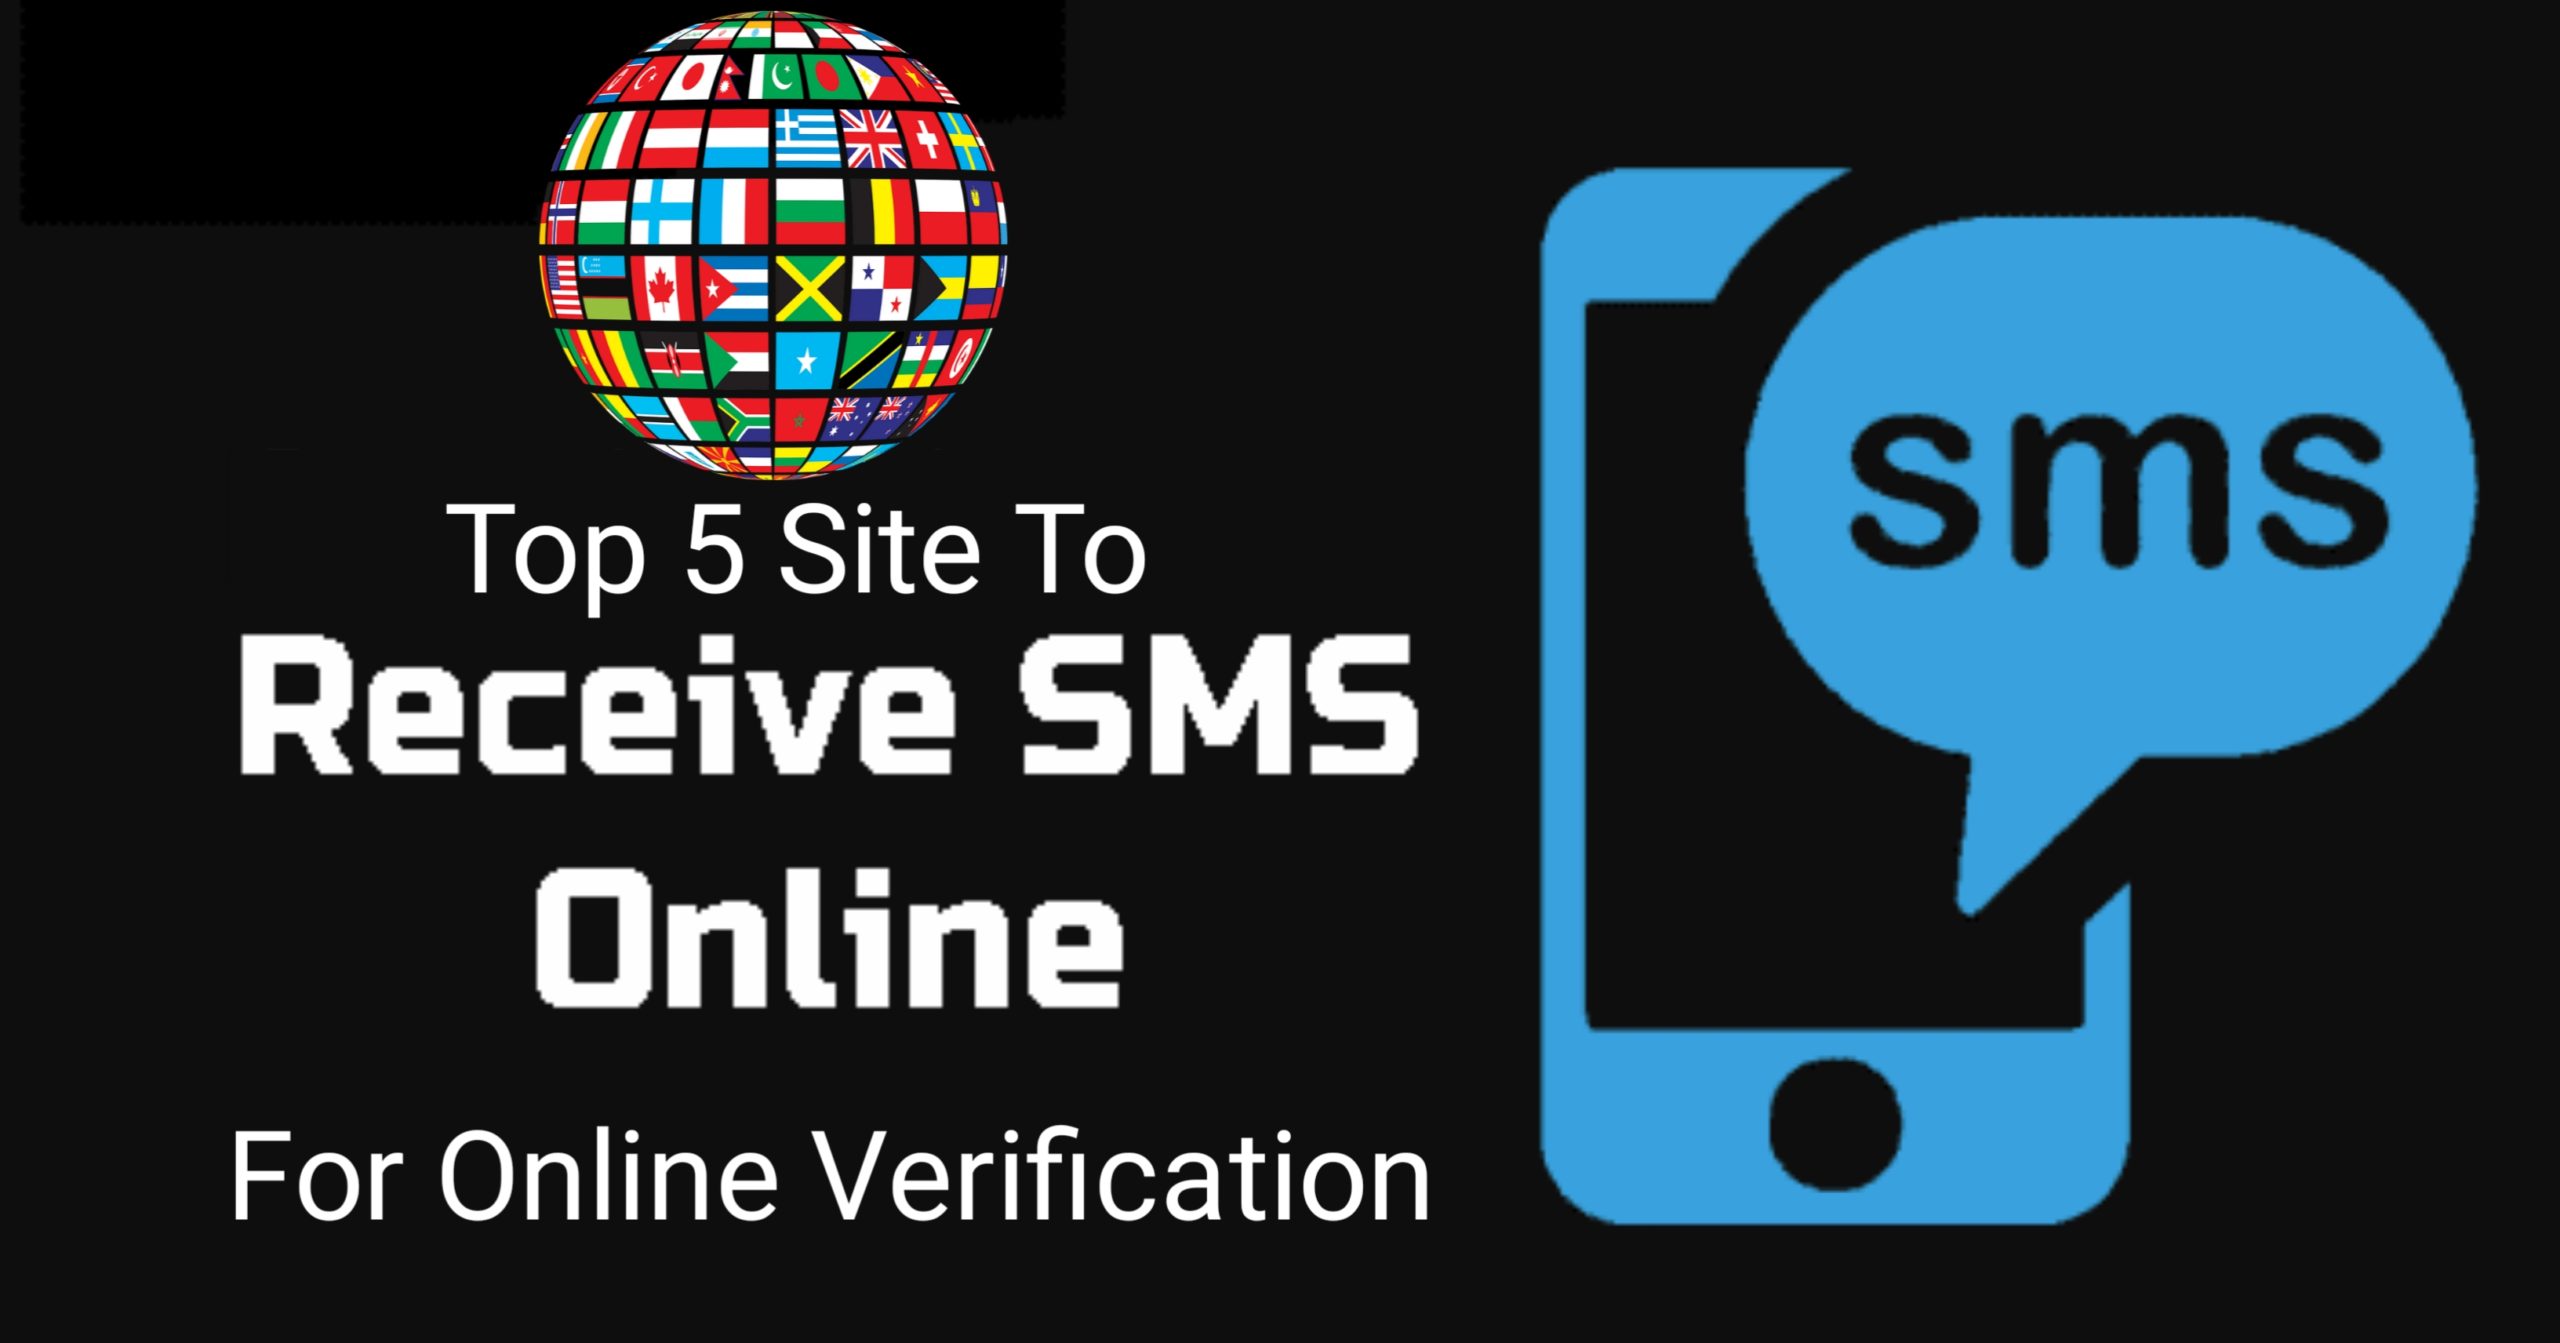 Top 5 Sites To Get Free US Phone Number For Online Verification on Android or iOS